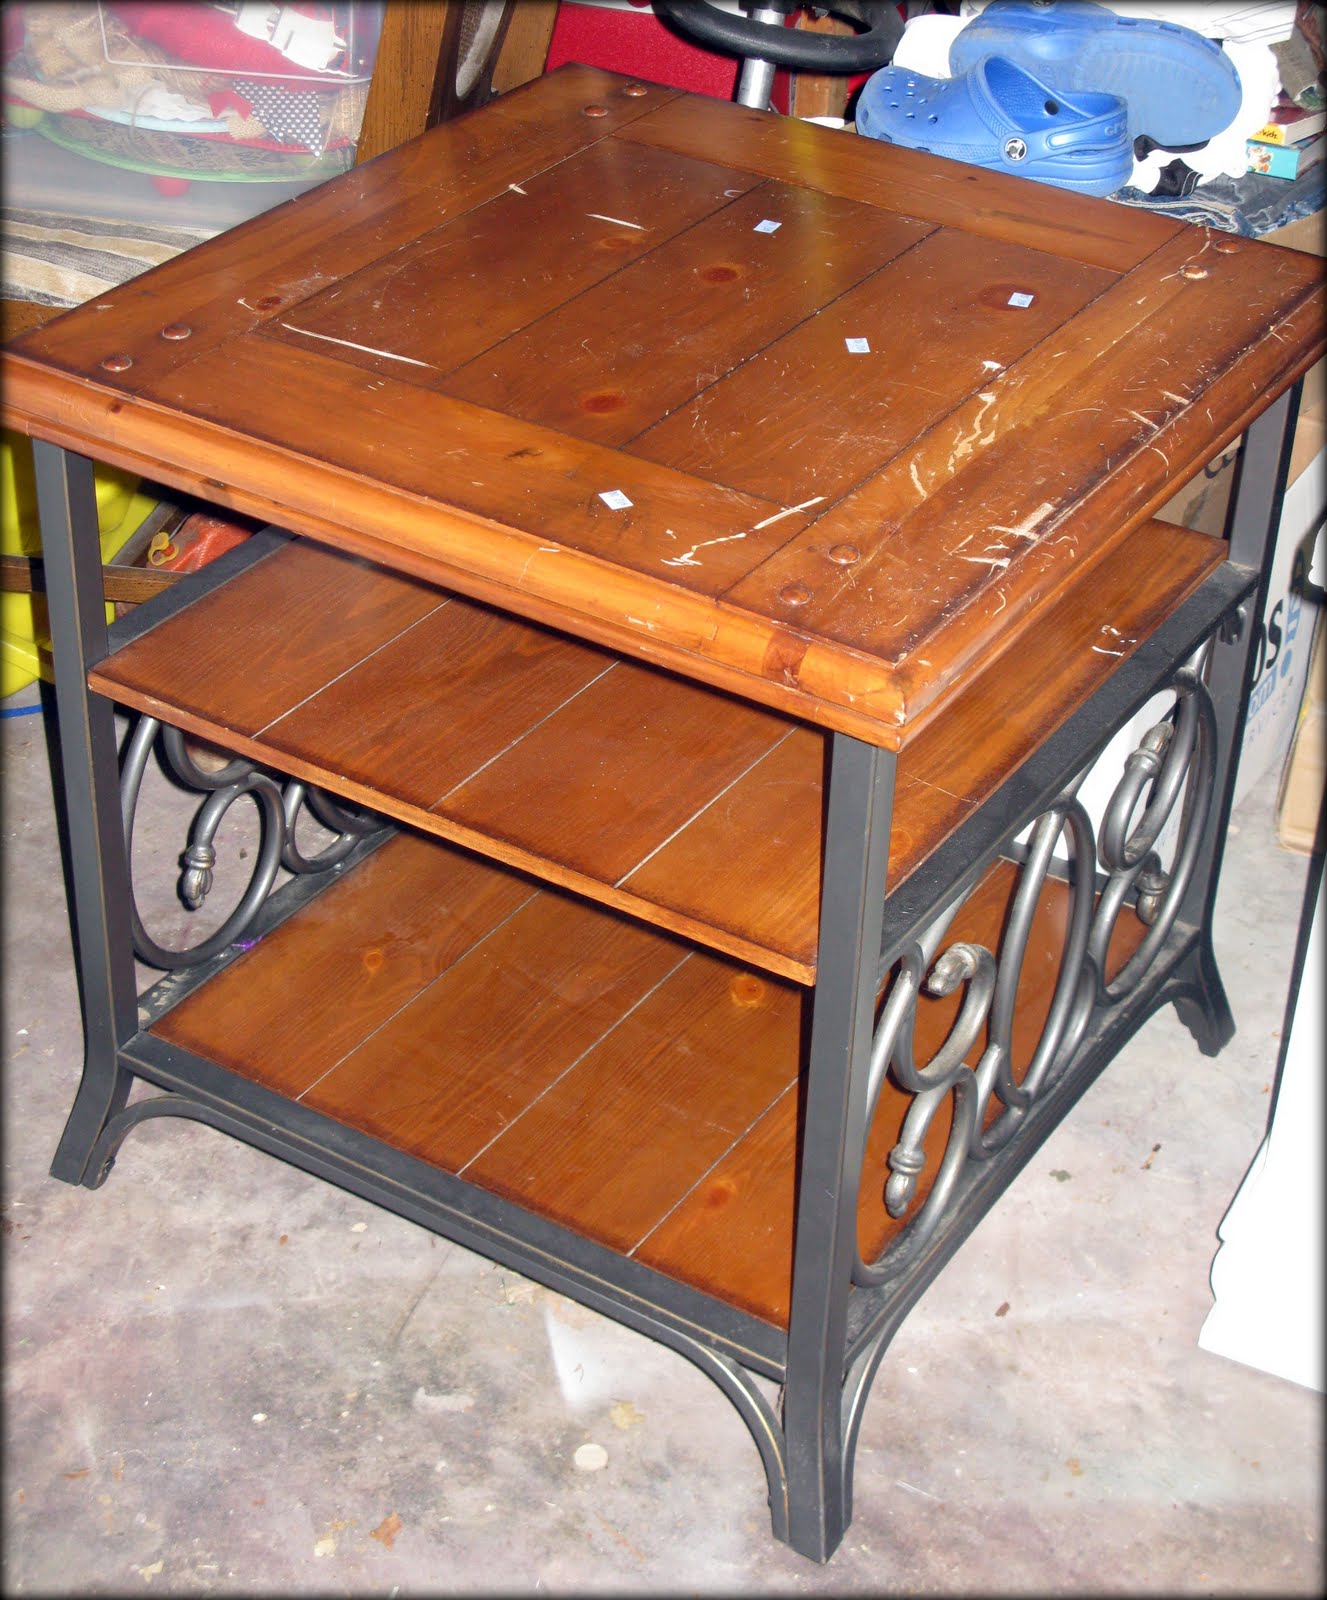 Beyond The Picket Fence: Hexagon Garage Sale Table Makeover